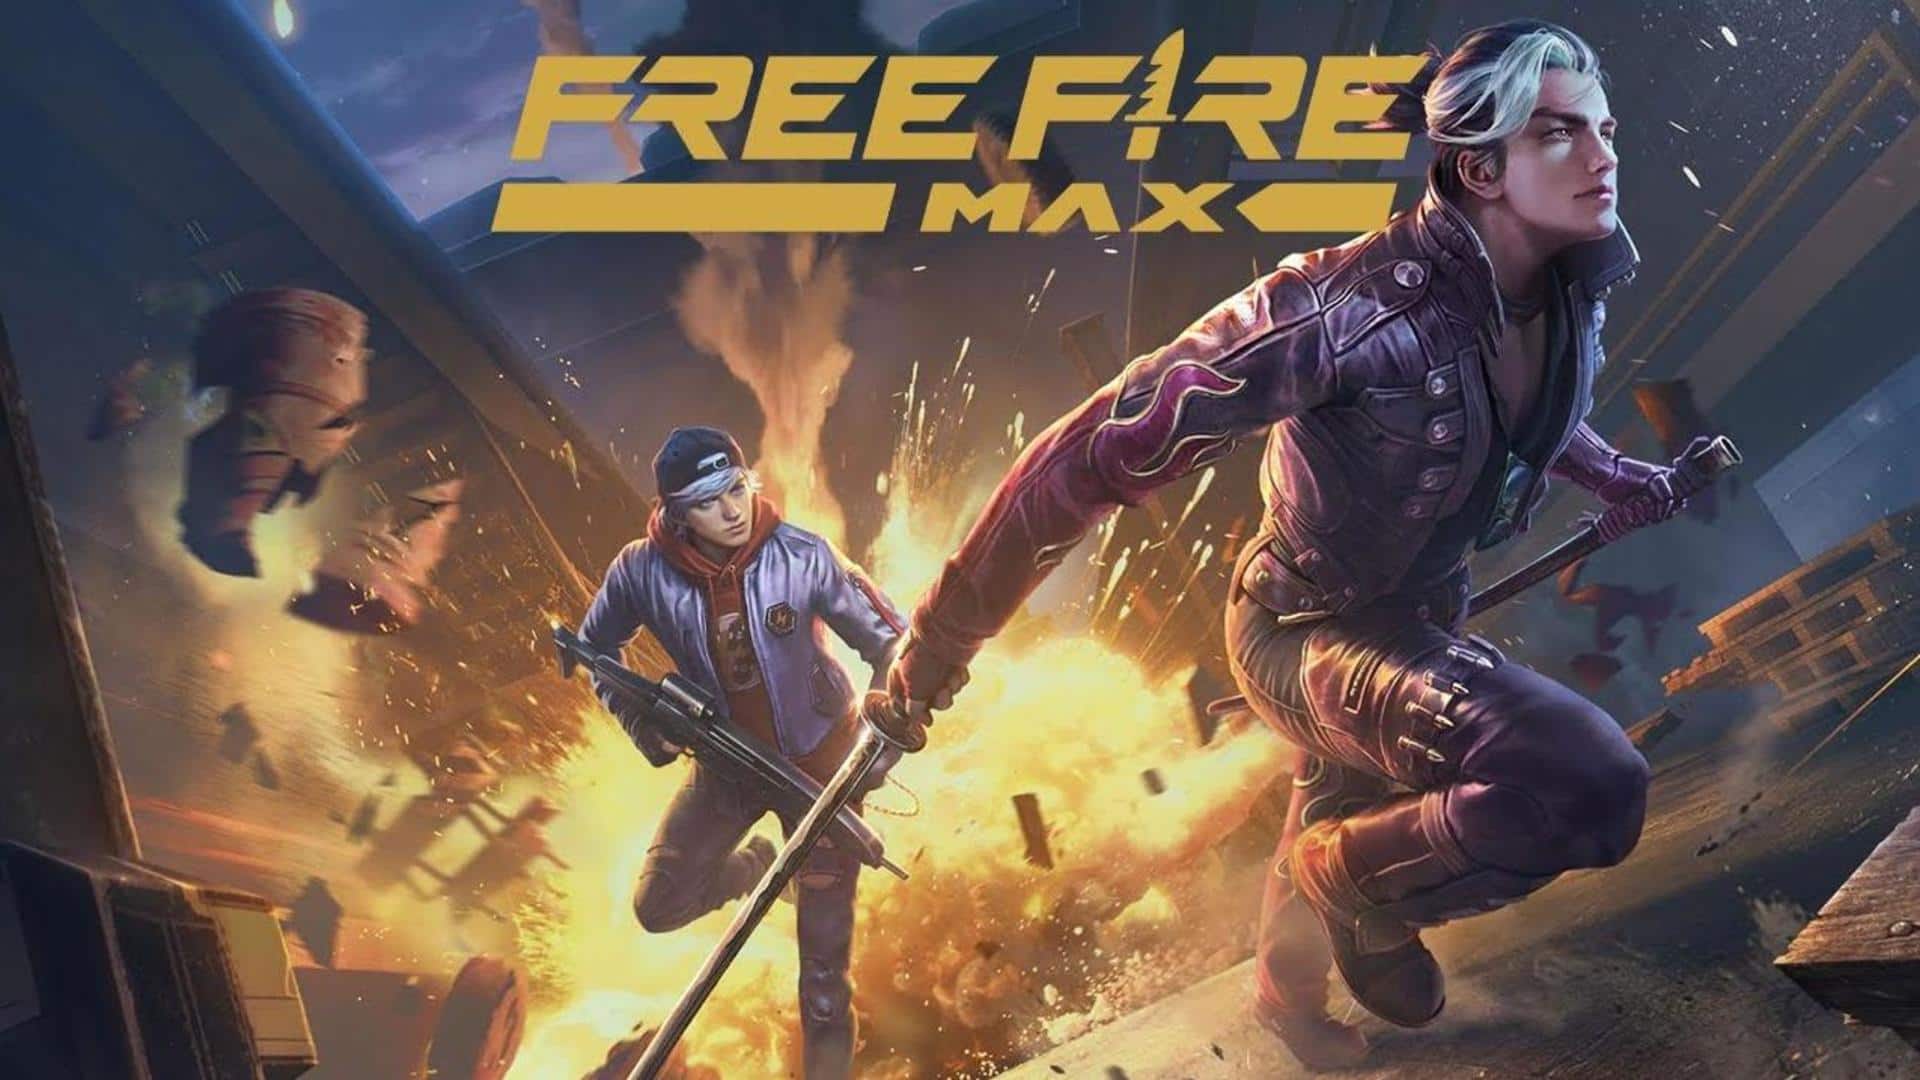 Garena Free Fire MAX's July 23 codes: How to redeem